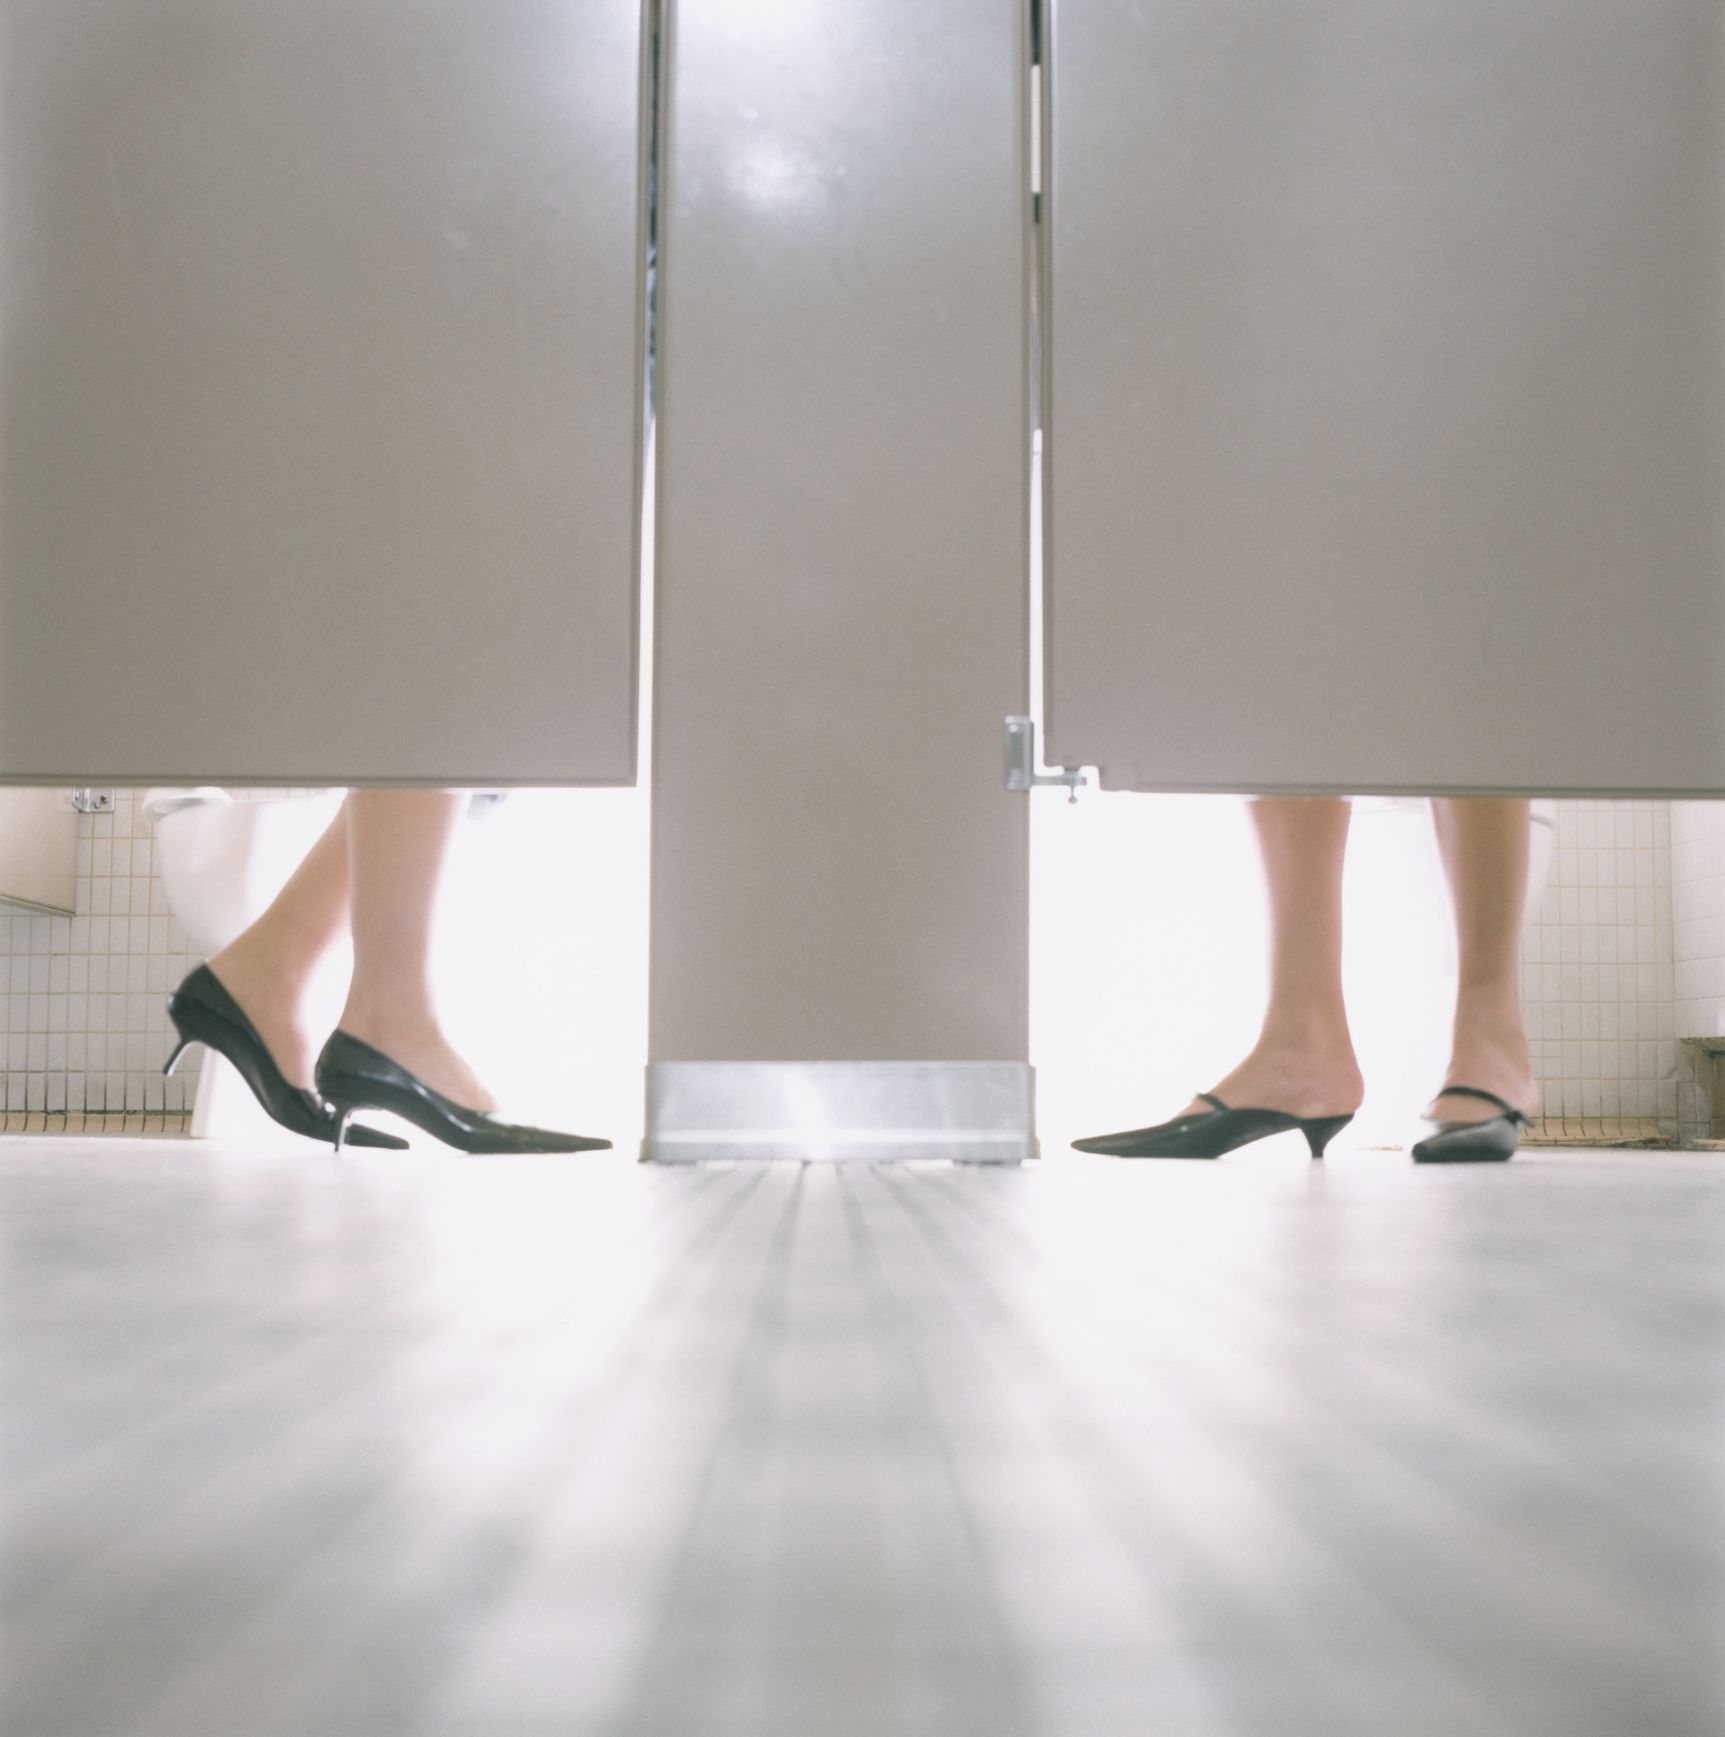 Why Do Women Leave Behind Toilet Seat Pee?